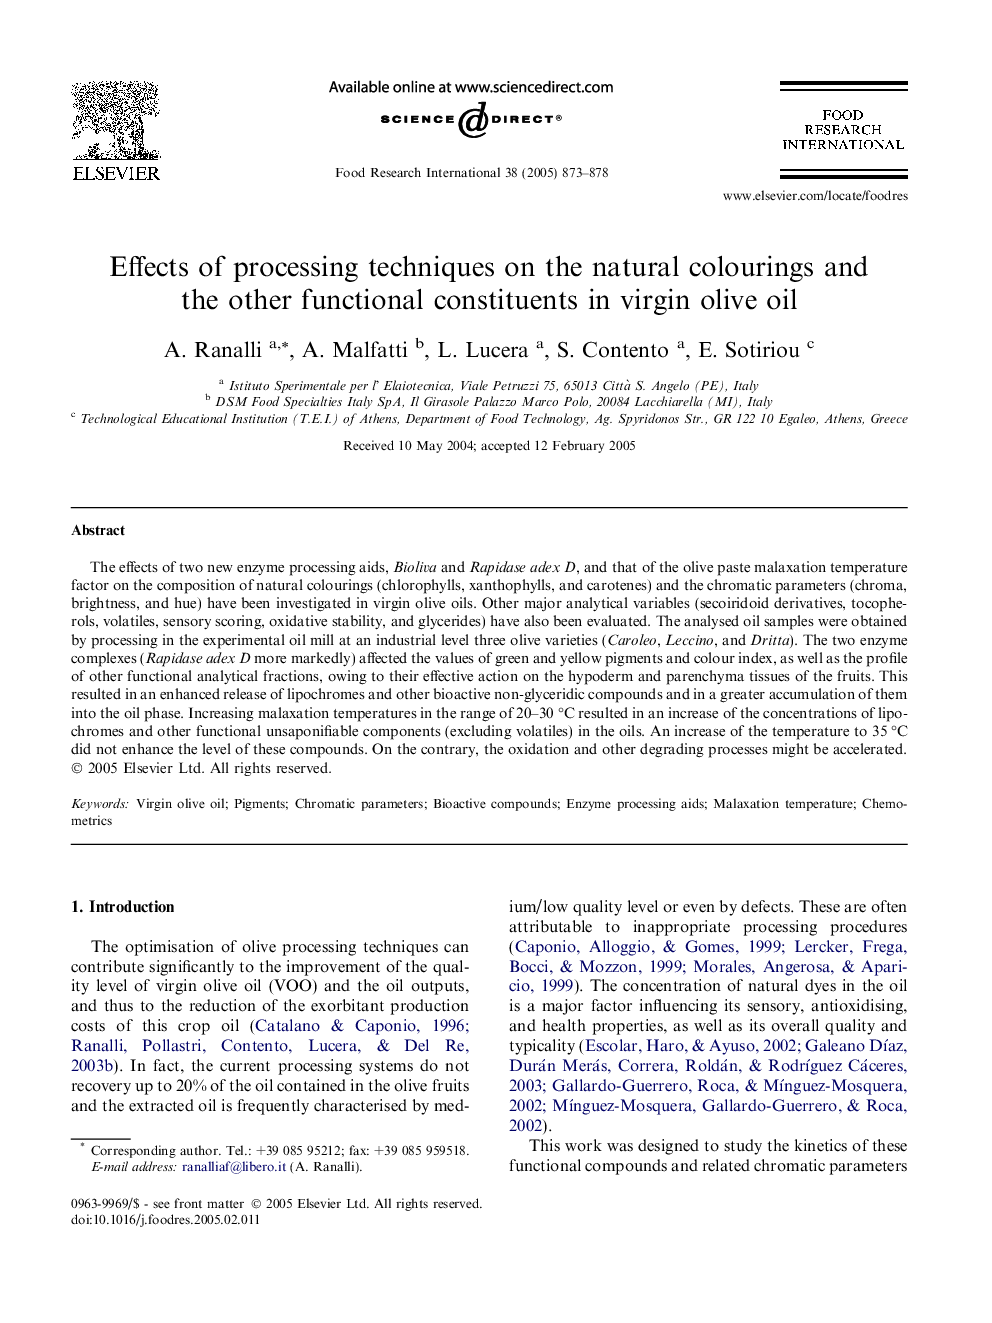 Effects of processing techniques on the natural colourings and the other functional constituents in virgin olive oil